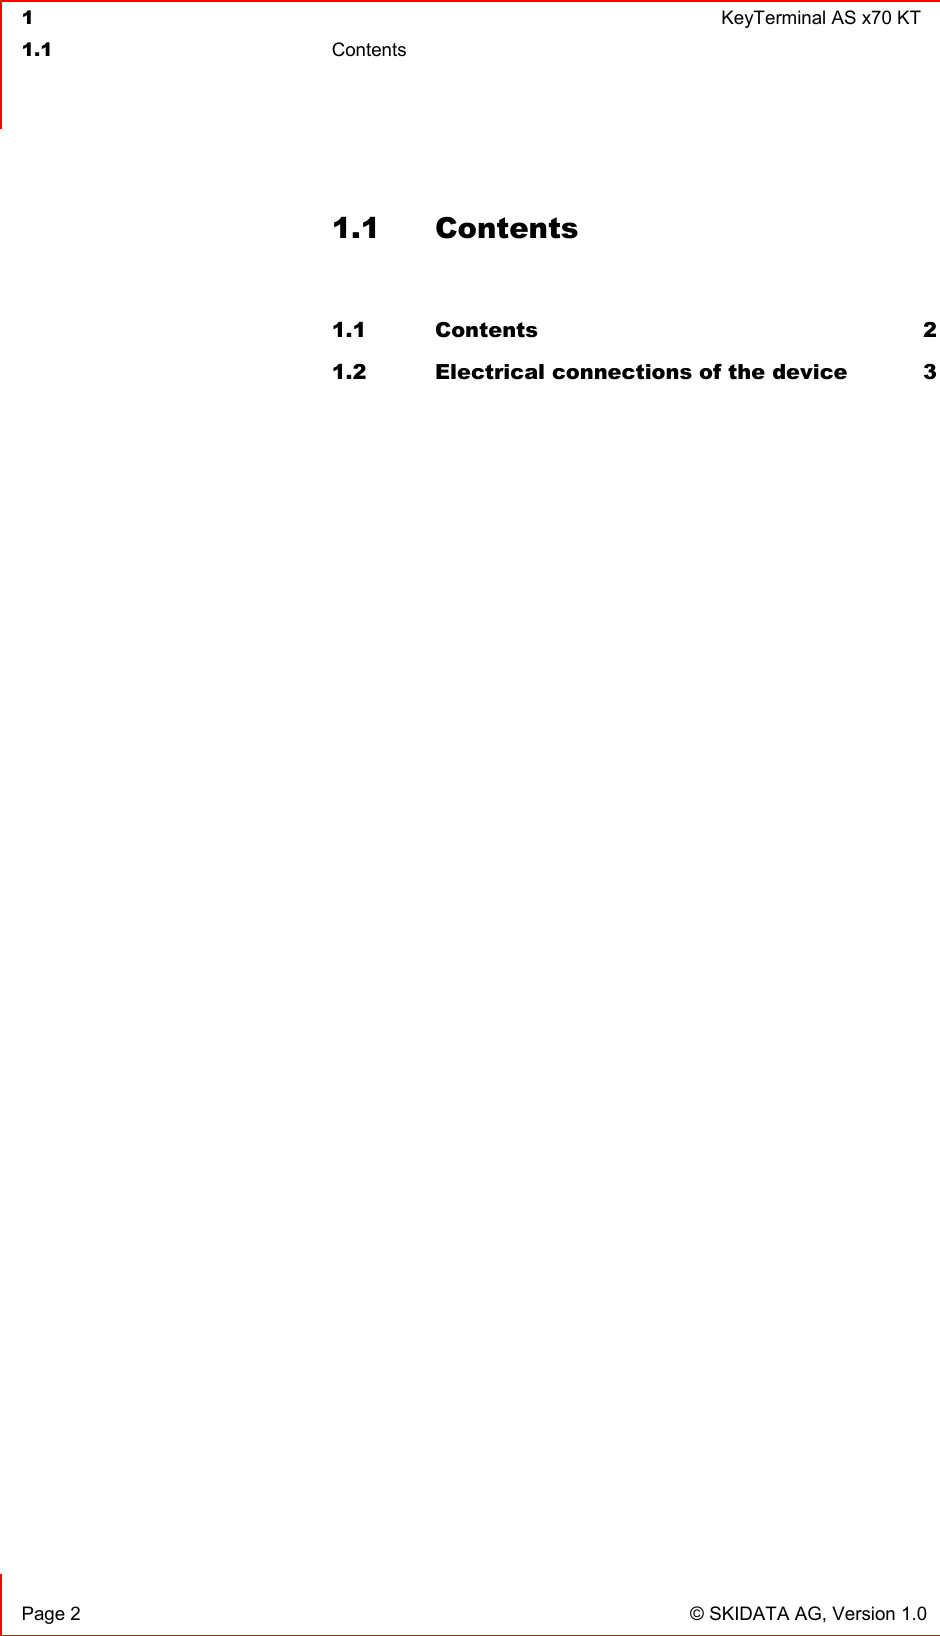  1  KeyTerminal AS x70 KT  1.1 Contents    Page 2  © SKIDATA AG, Version 1.0 1.1 Contents  1.1 Contents 2 1.2 Electrical connections of the device  3  